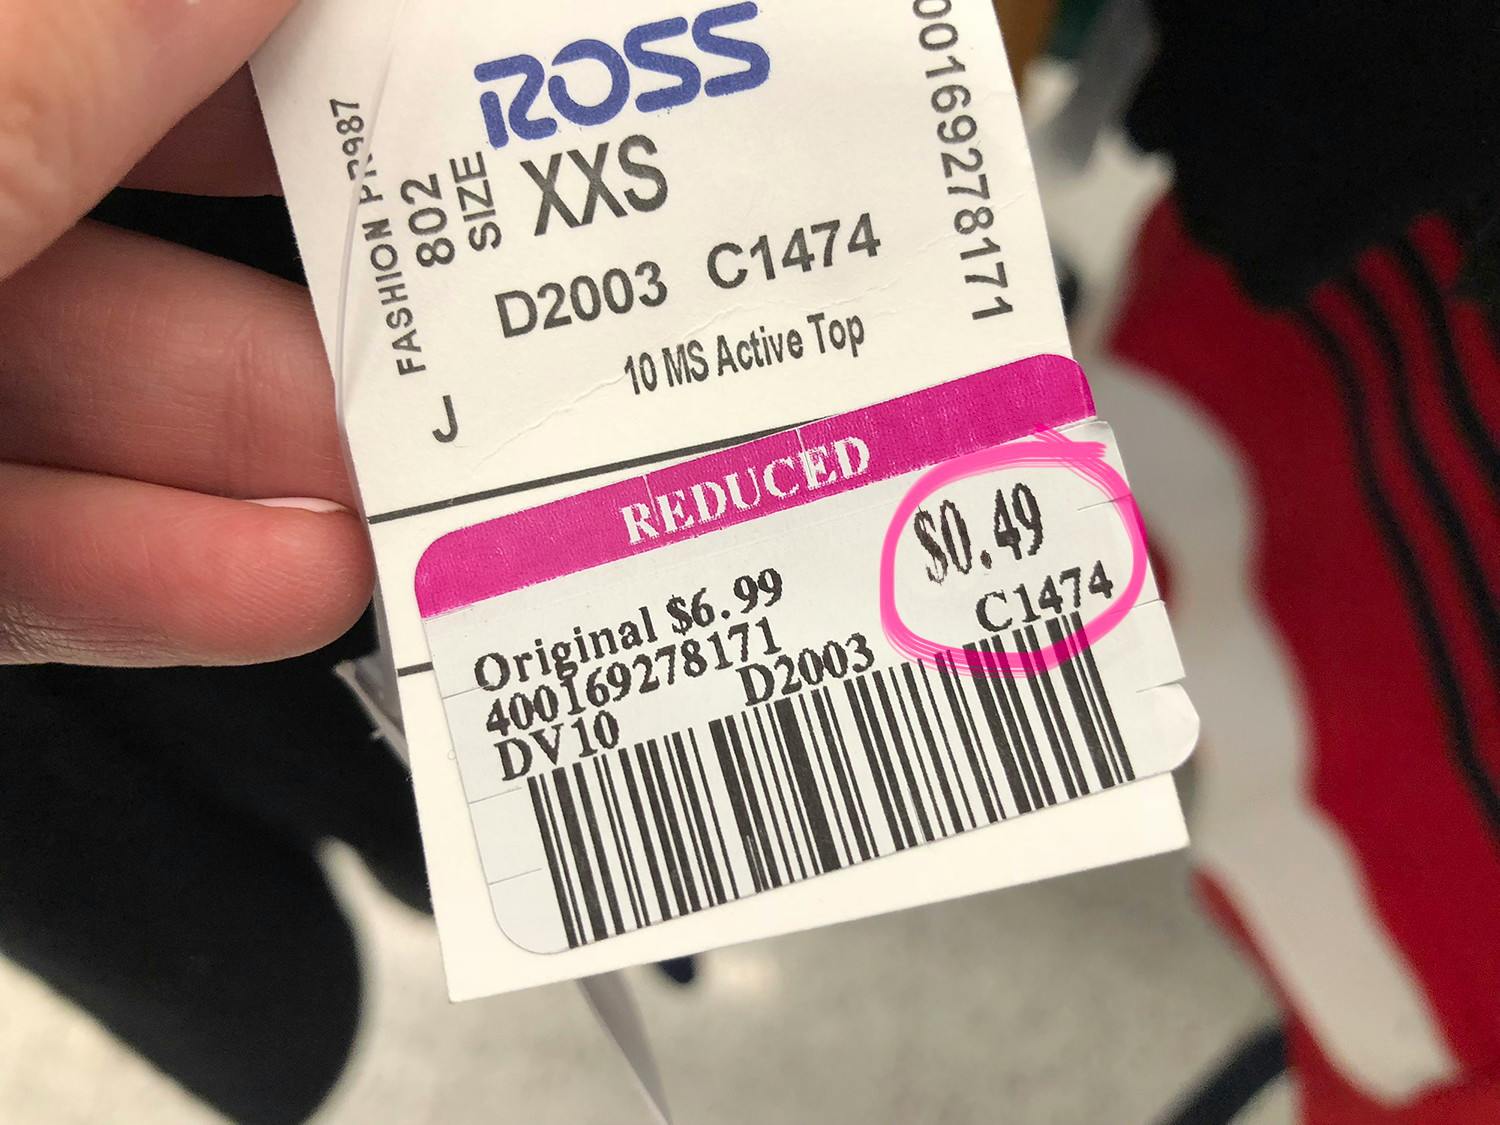 Ross Is Reopening With Massive Discounts The Krazy Coupon Lady